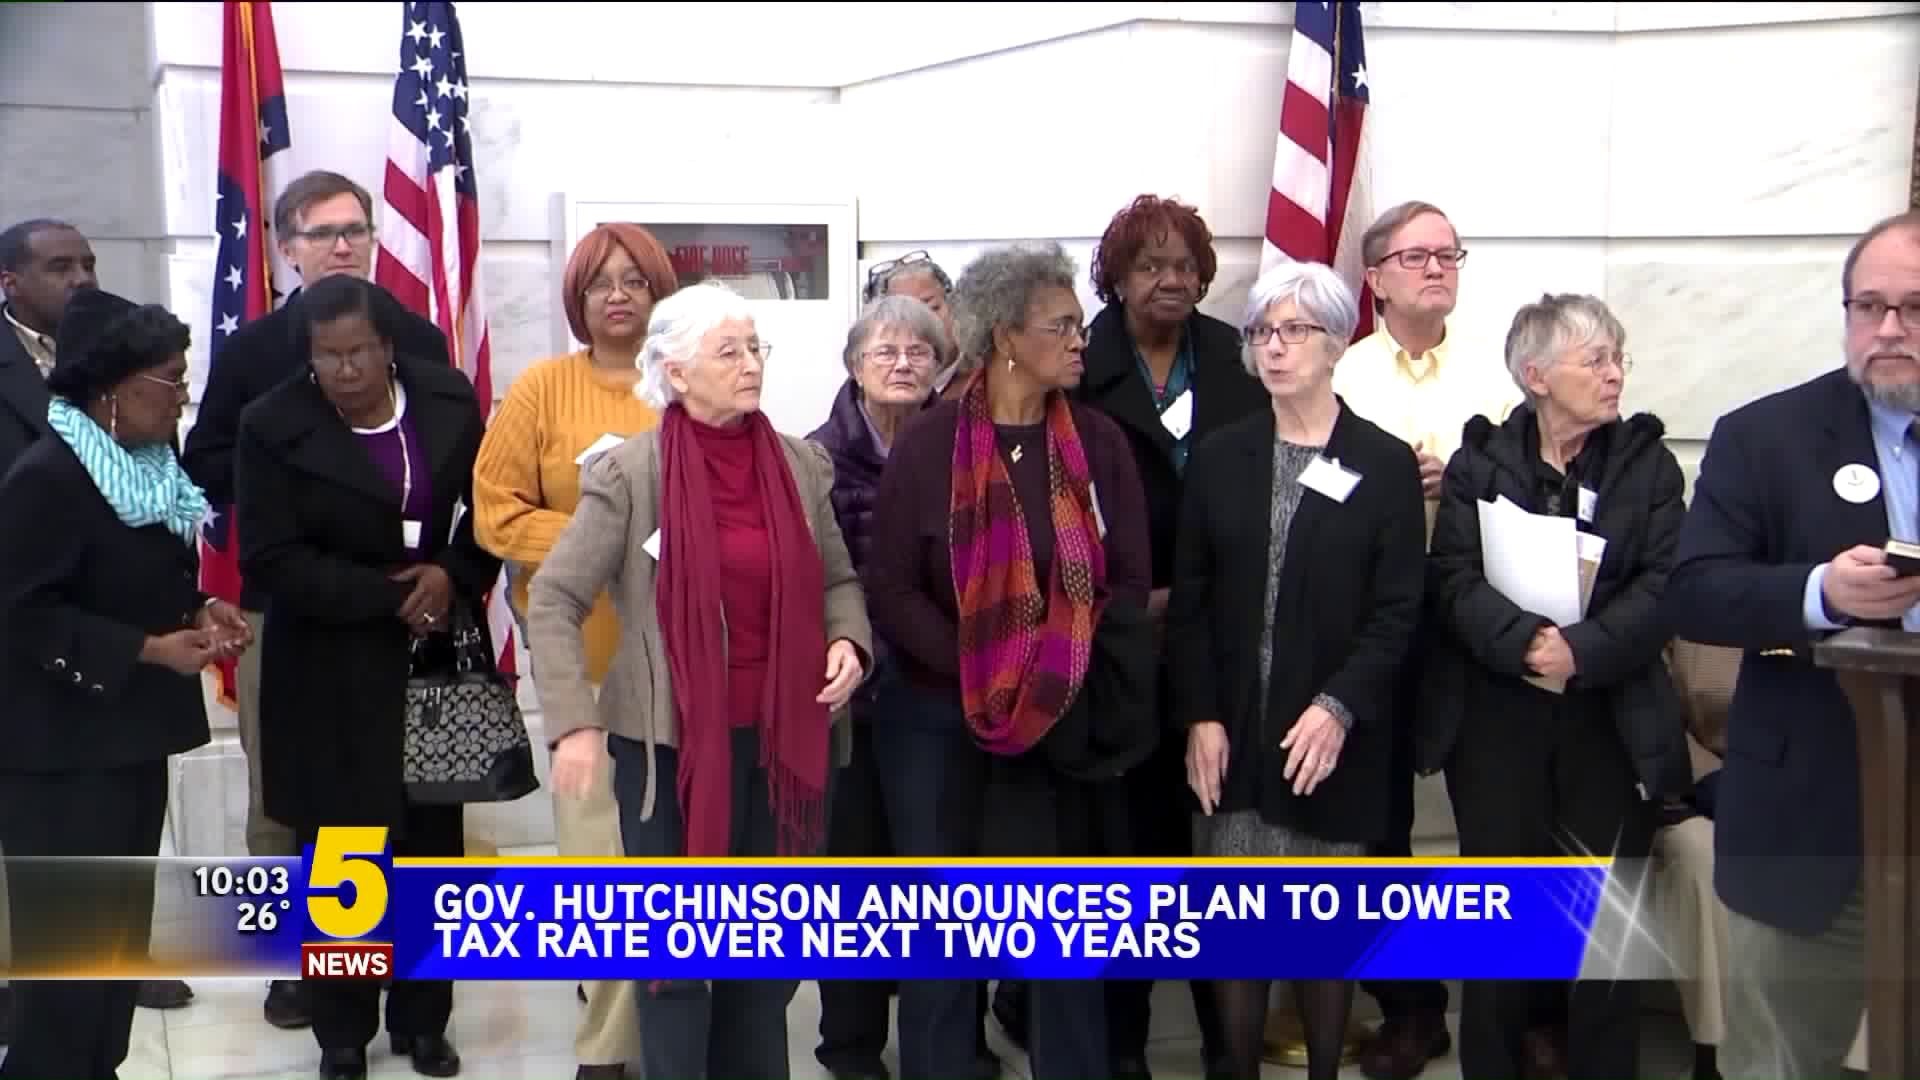 Gov. Hutchinson Announces plan to lower Tax Rate Over Next Two Years